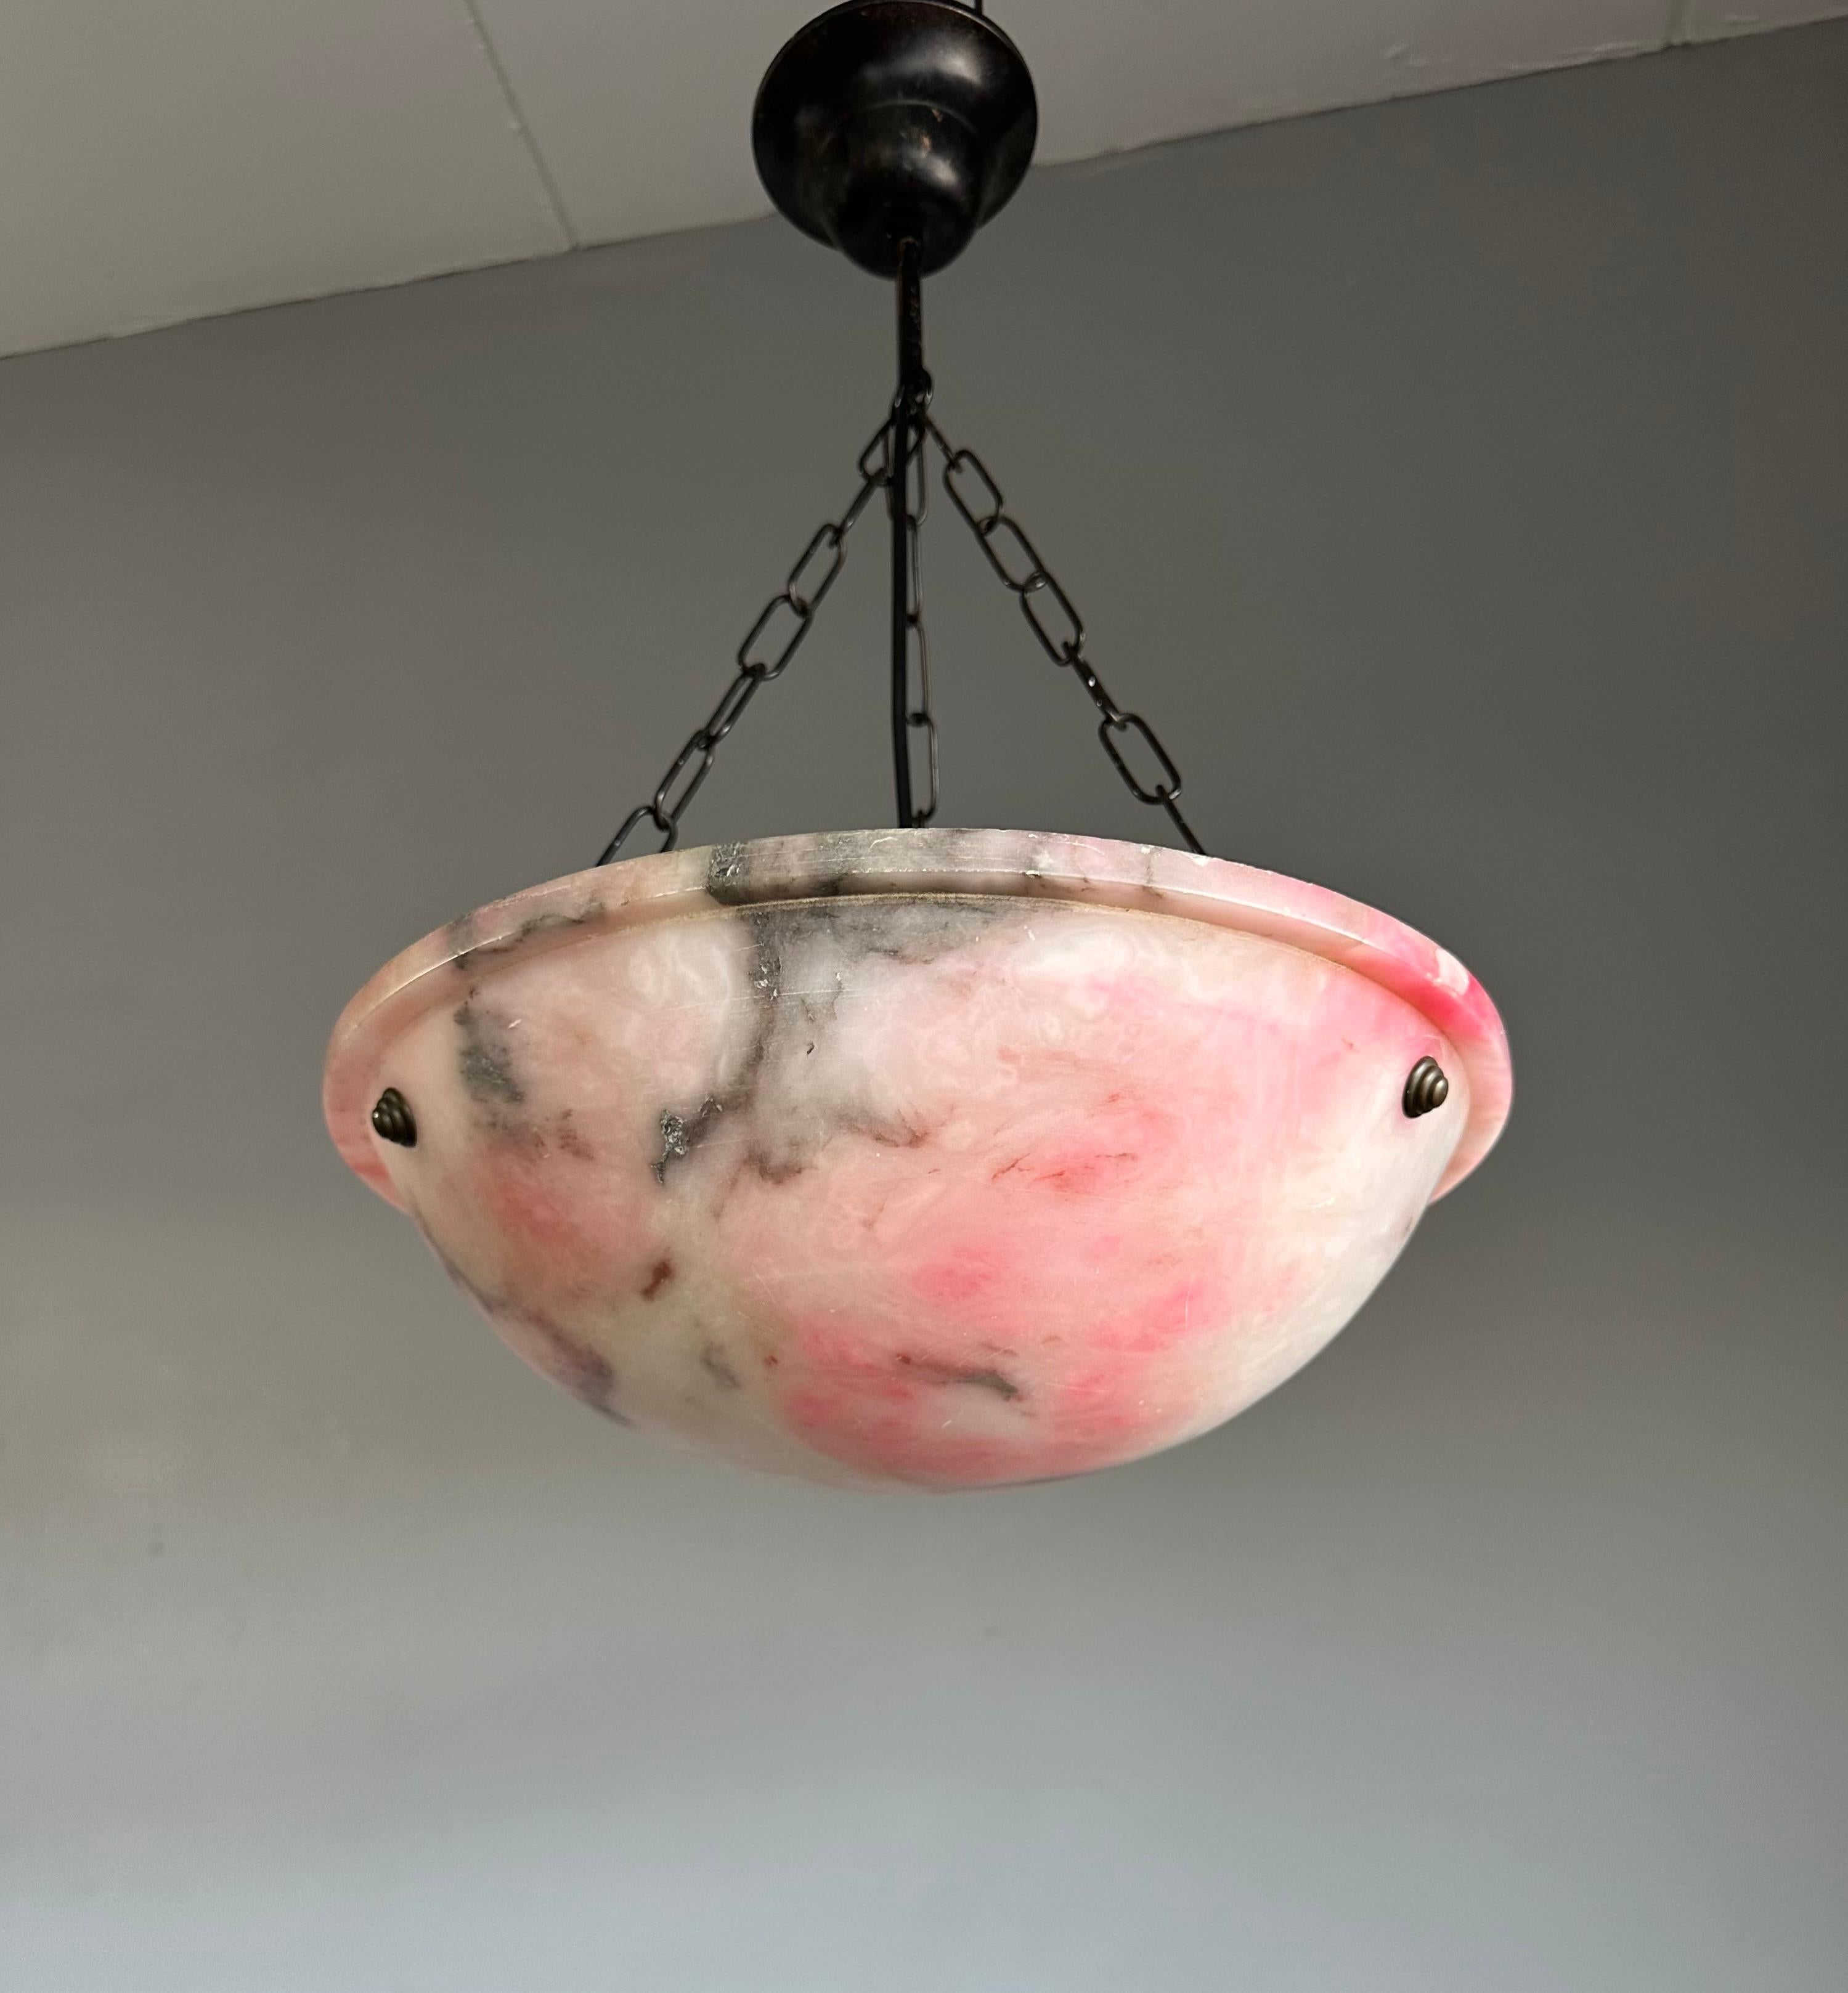 Great shape and warmest color alabaster light with matching chain and canopy.

If you are looking for a truly beautiful, great quality and very good condition alabaster pendant then this striking specimen could be the one or you. This practical size